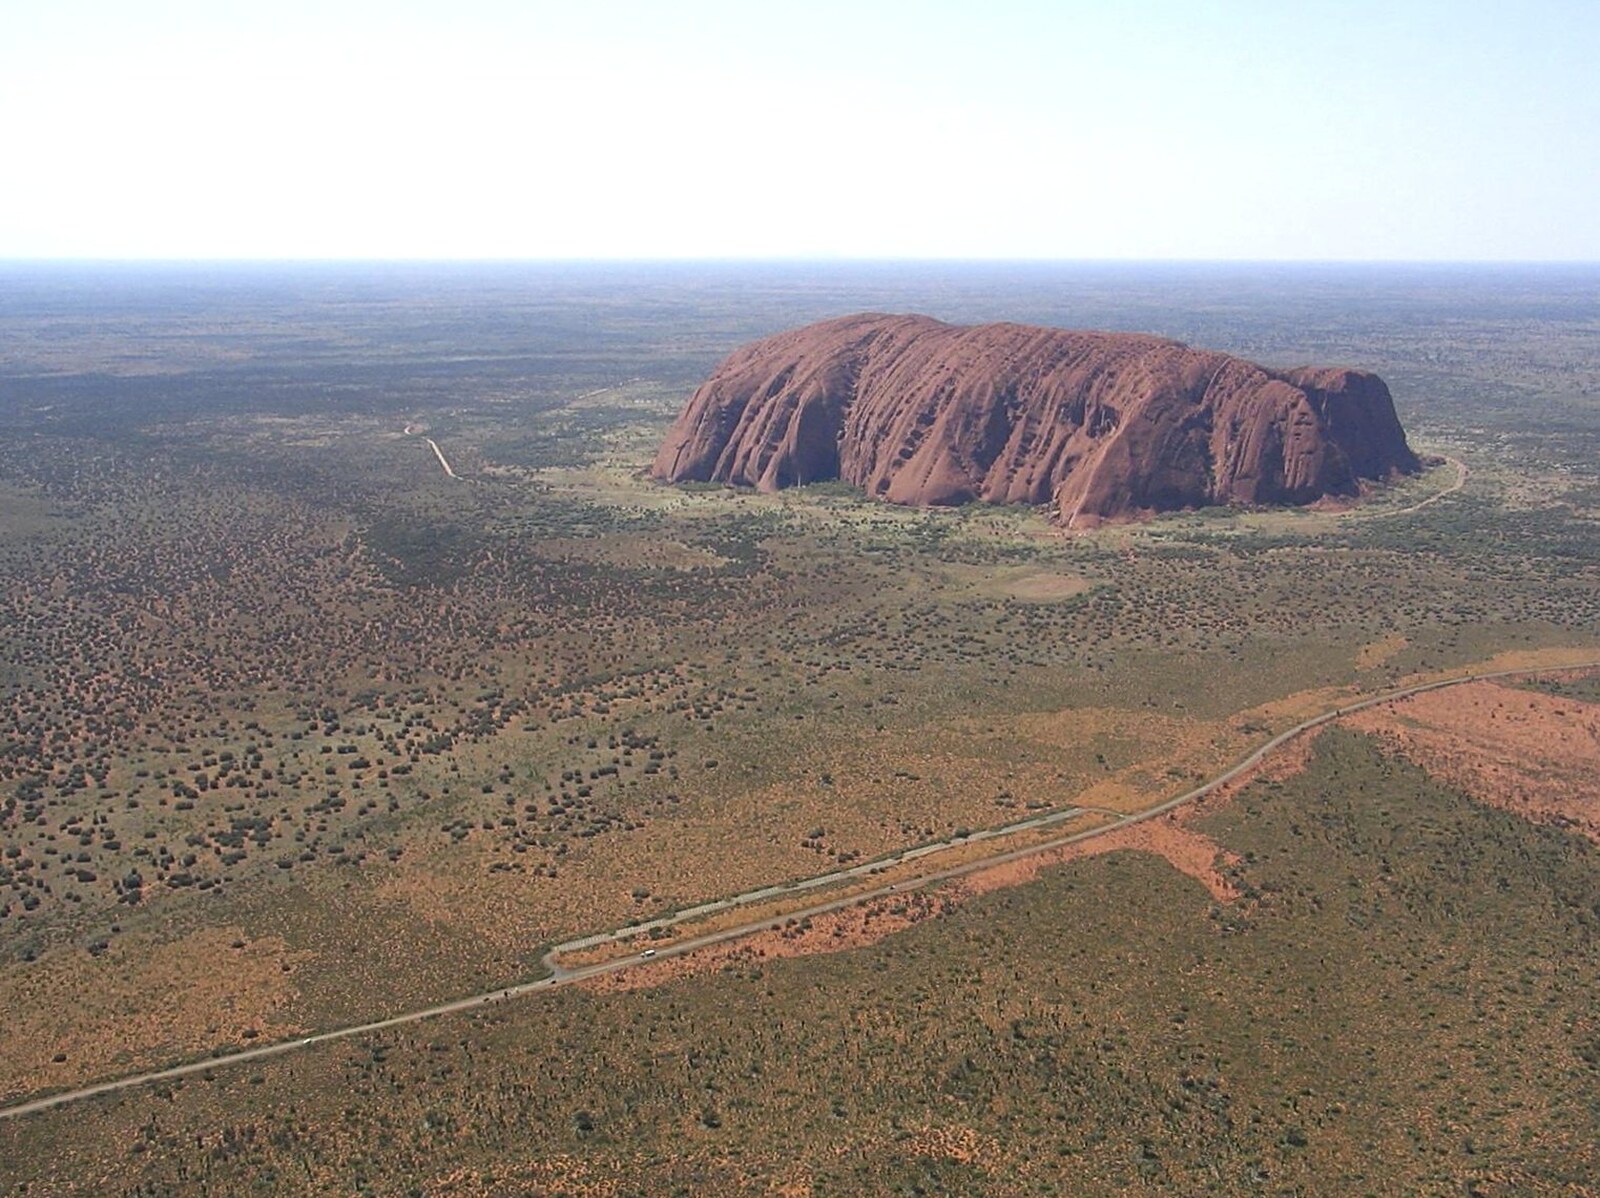 Uluru from the air from The Red Centre: Yulara and Uluru, Northern Territories, Australia - 8th October 2004